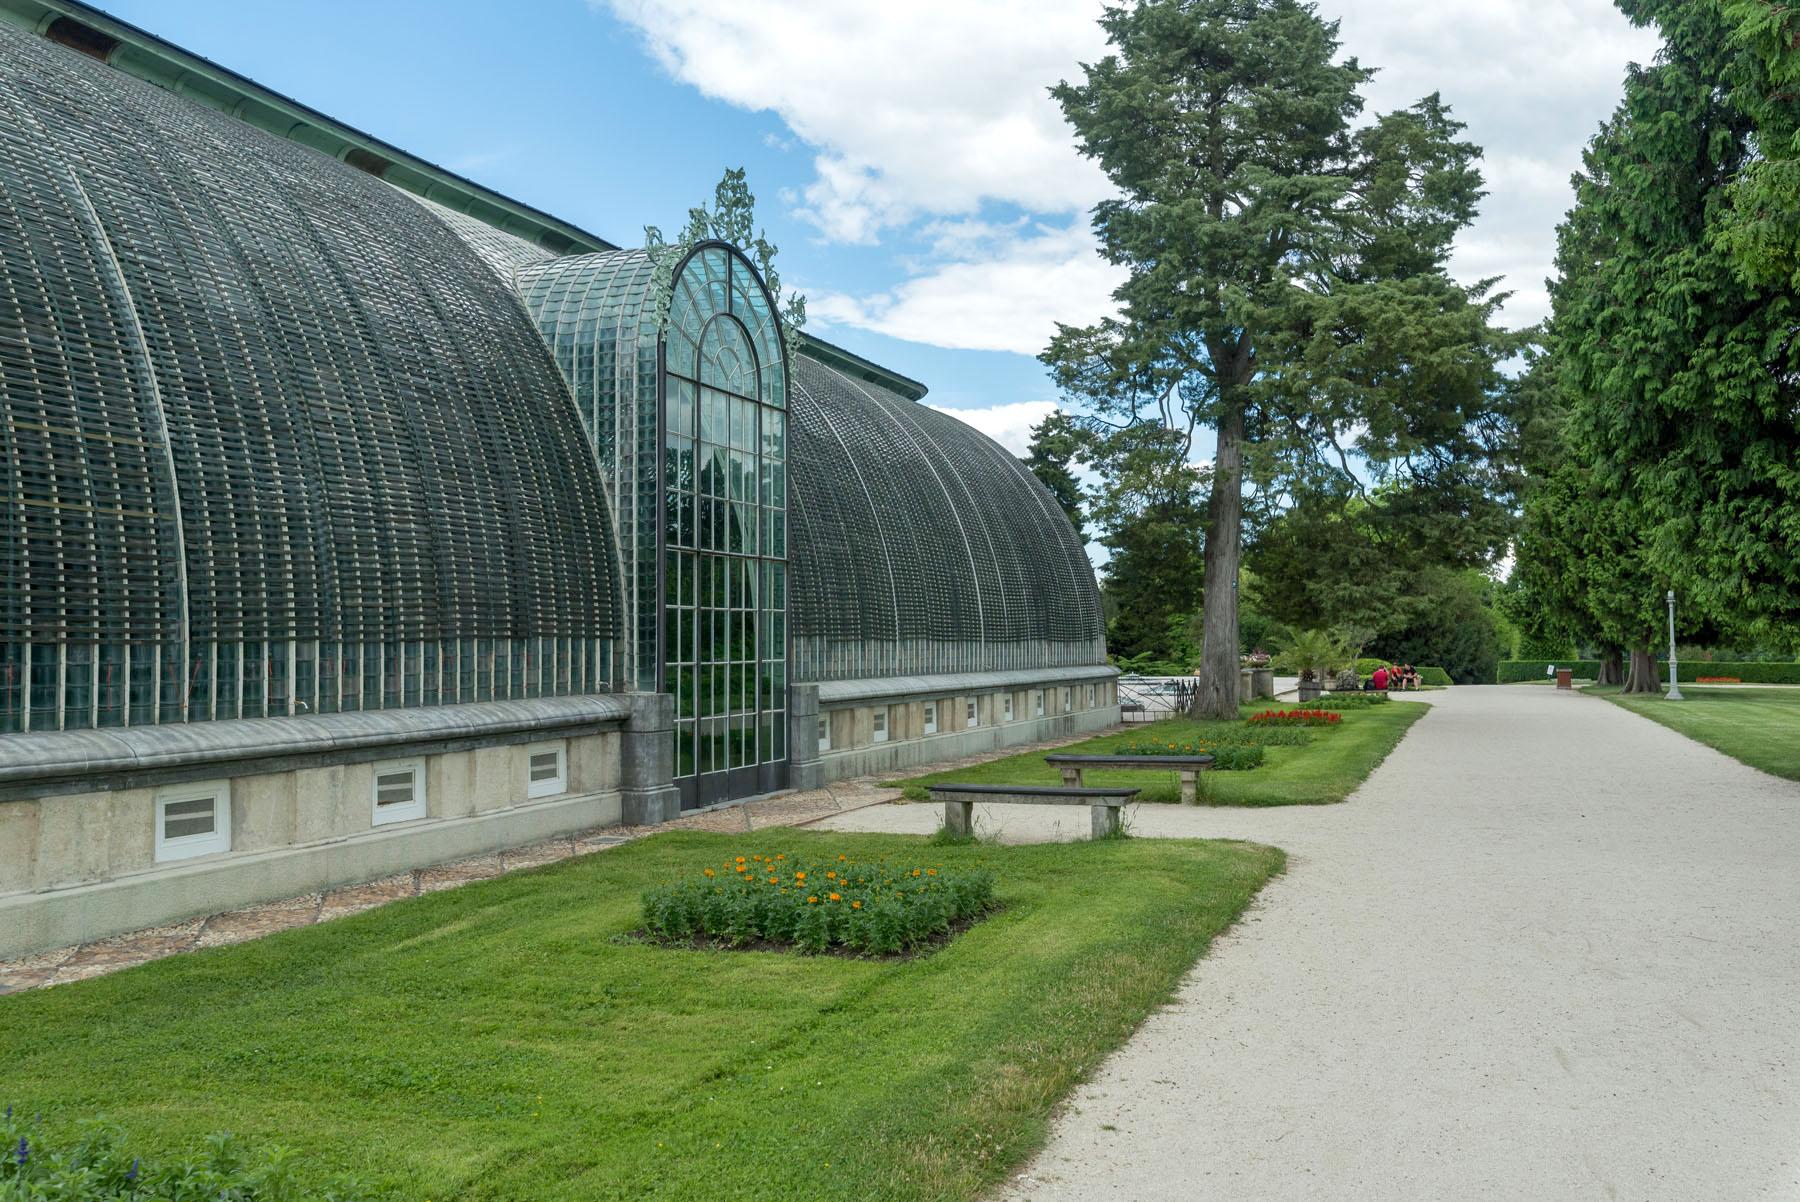 The greenhouse creates a divide between the parterre and landscaped sections of the park. About 250 species of tropical and subtropical plants are grown inside. – © Archive of Lednice Castle